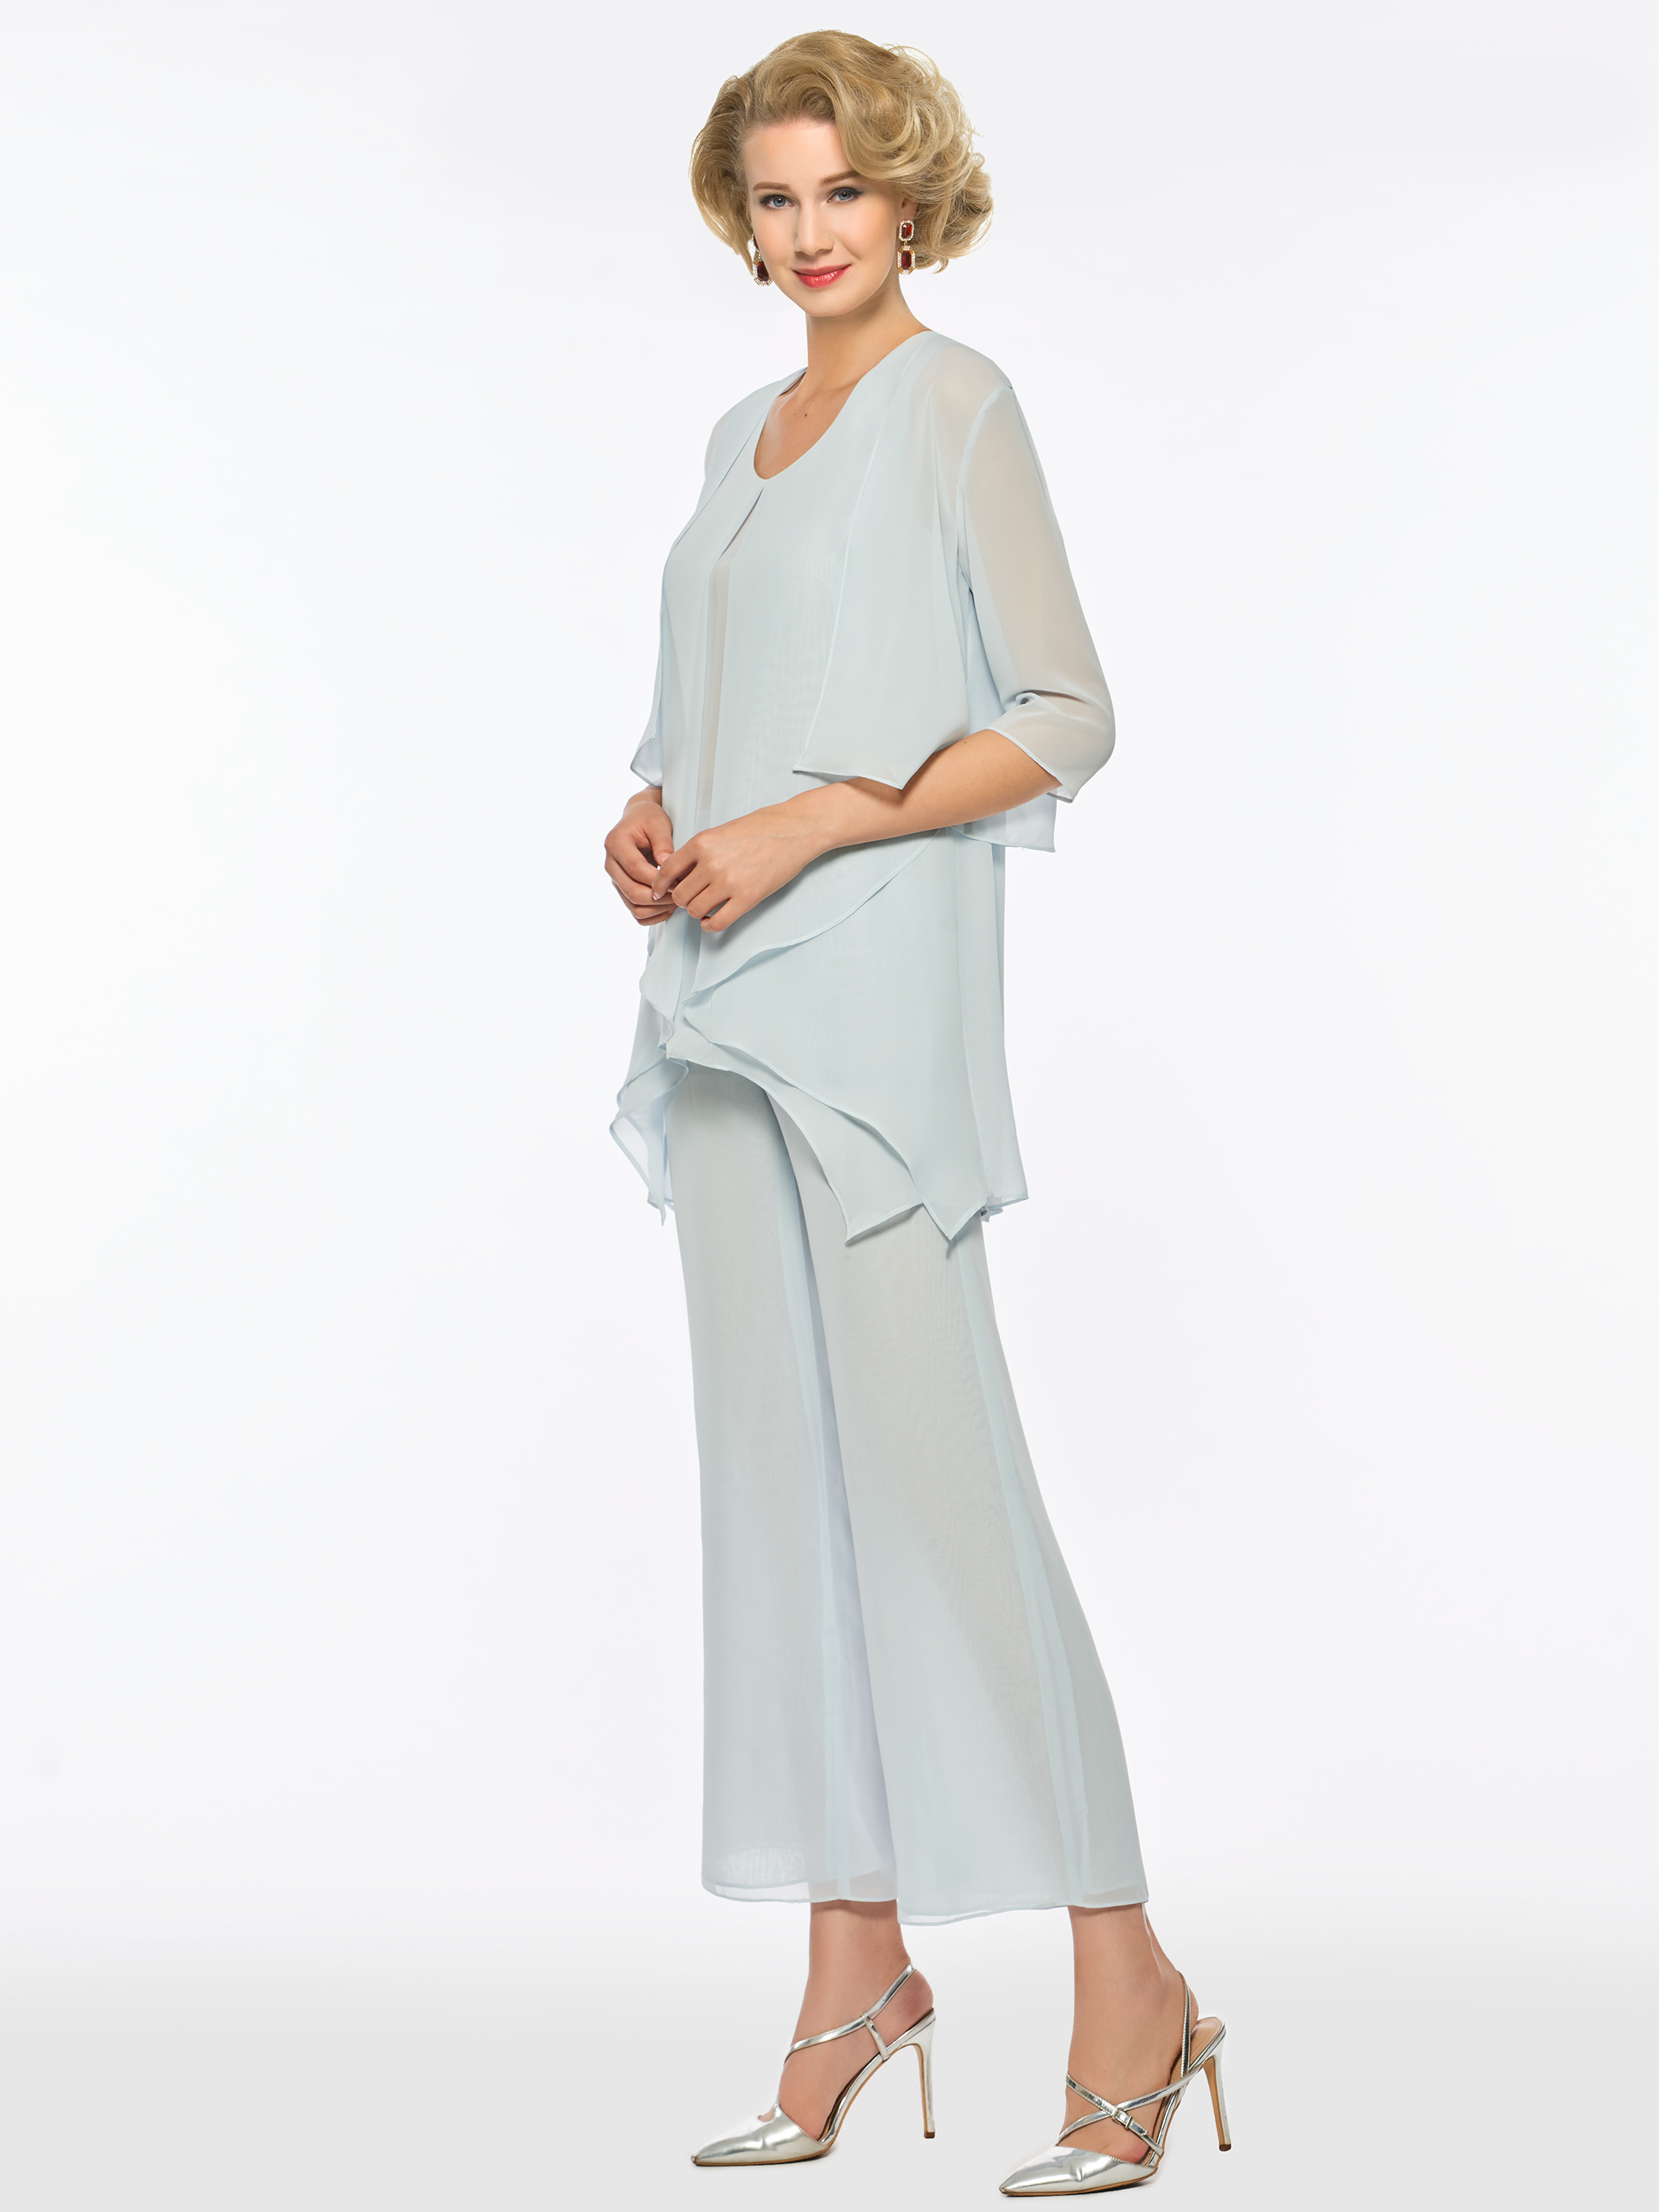 Loose Chiffon 3 Pieces Mother of the Bride Pantsuits